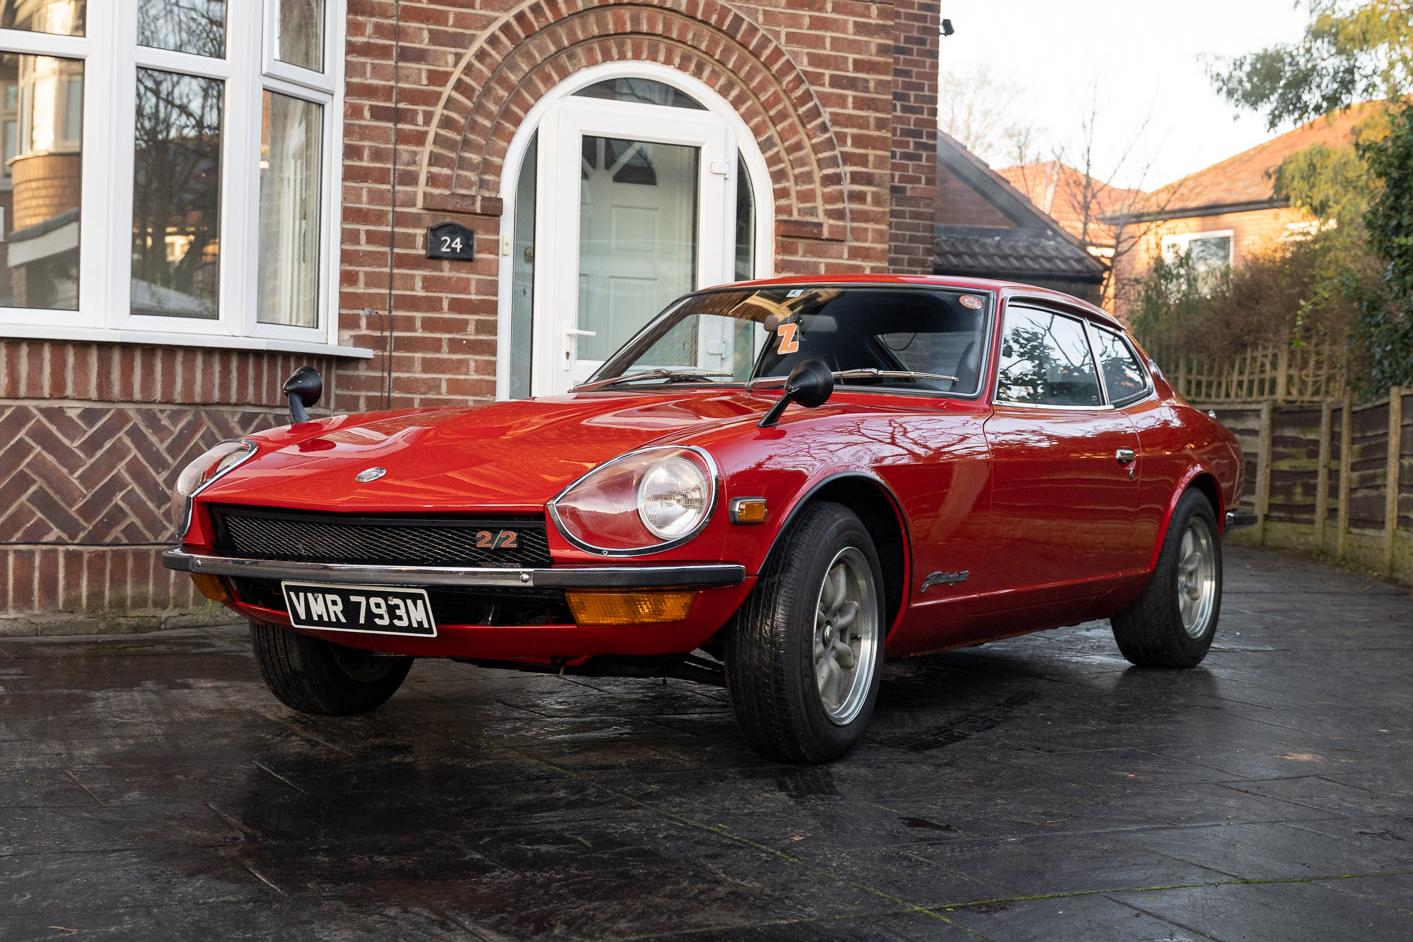 1974 NISSAN FAIRLADY Z (GS30) 2/2 for sale by auction in Sale 